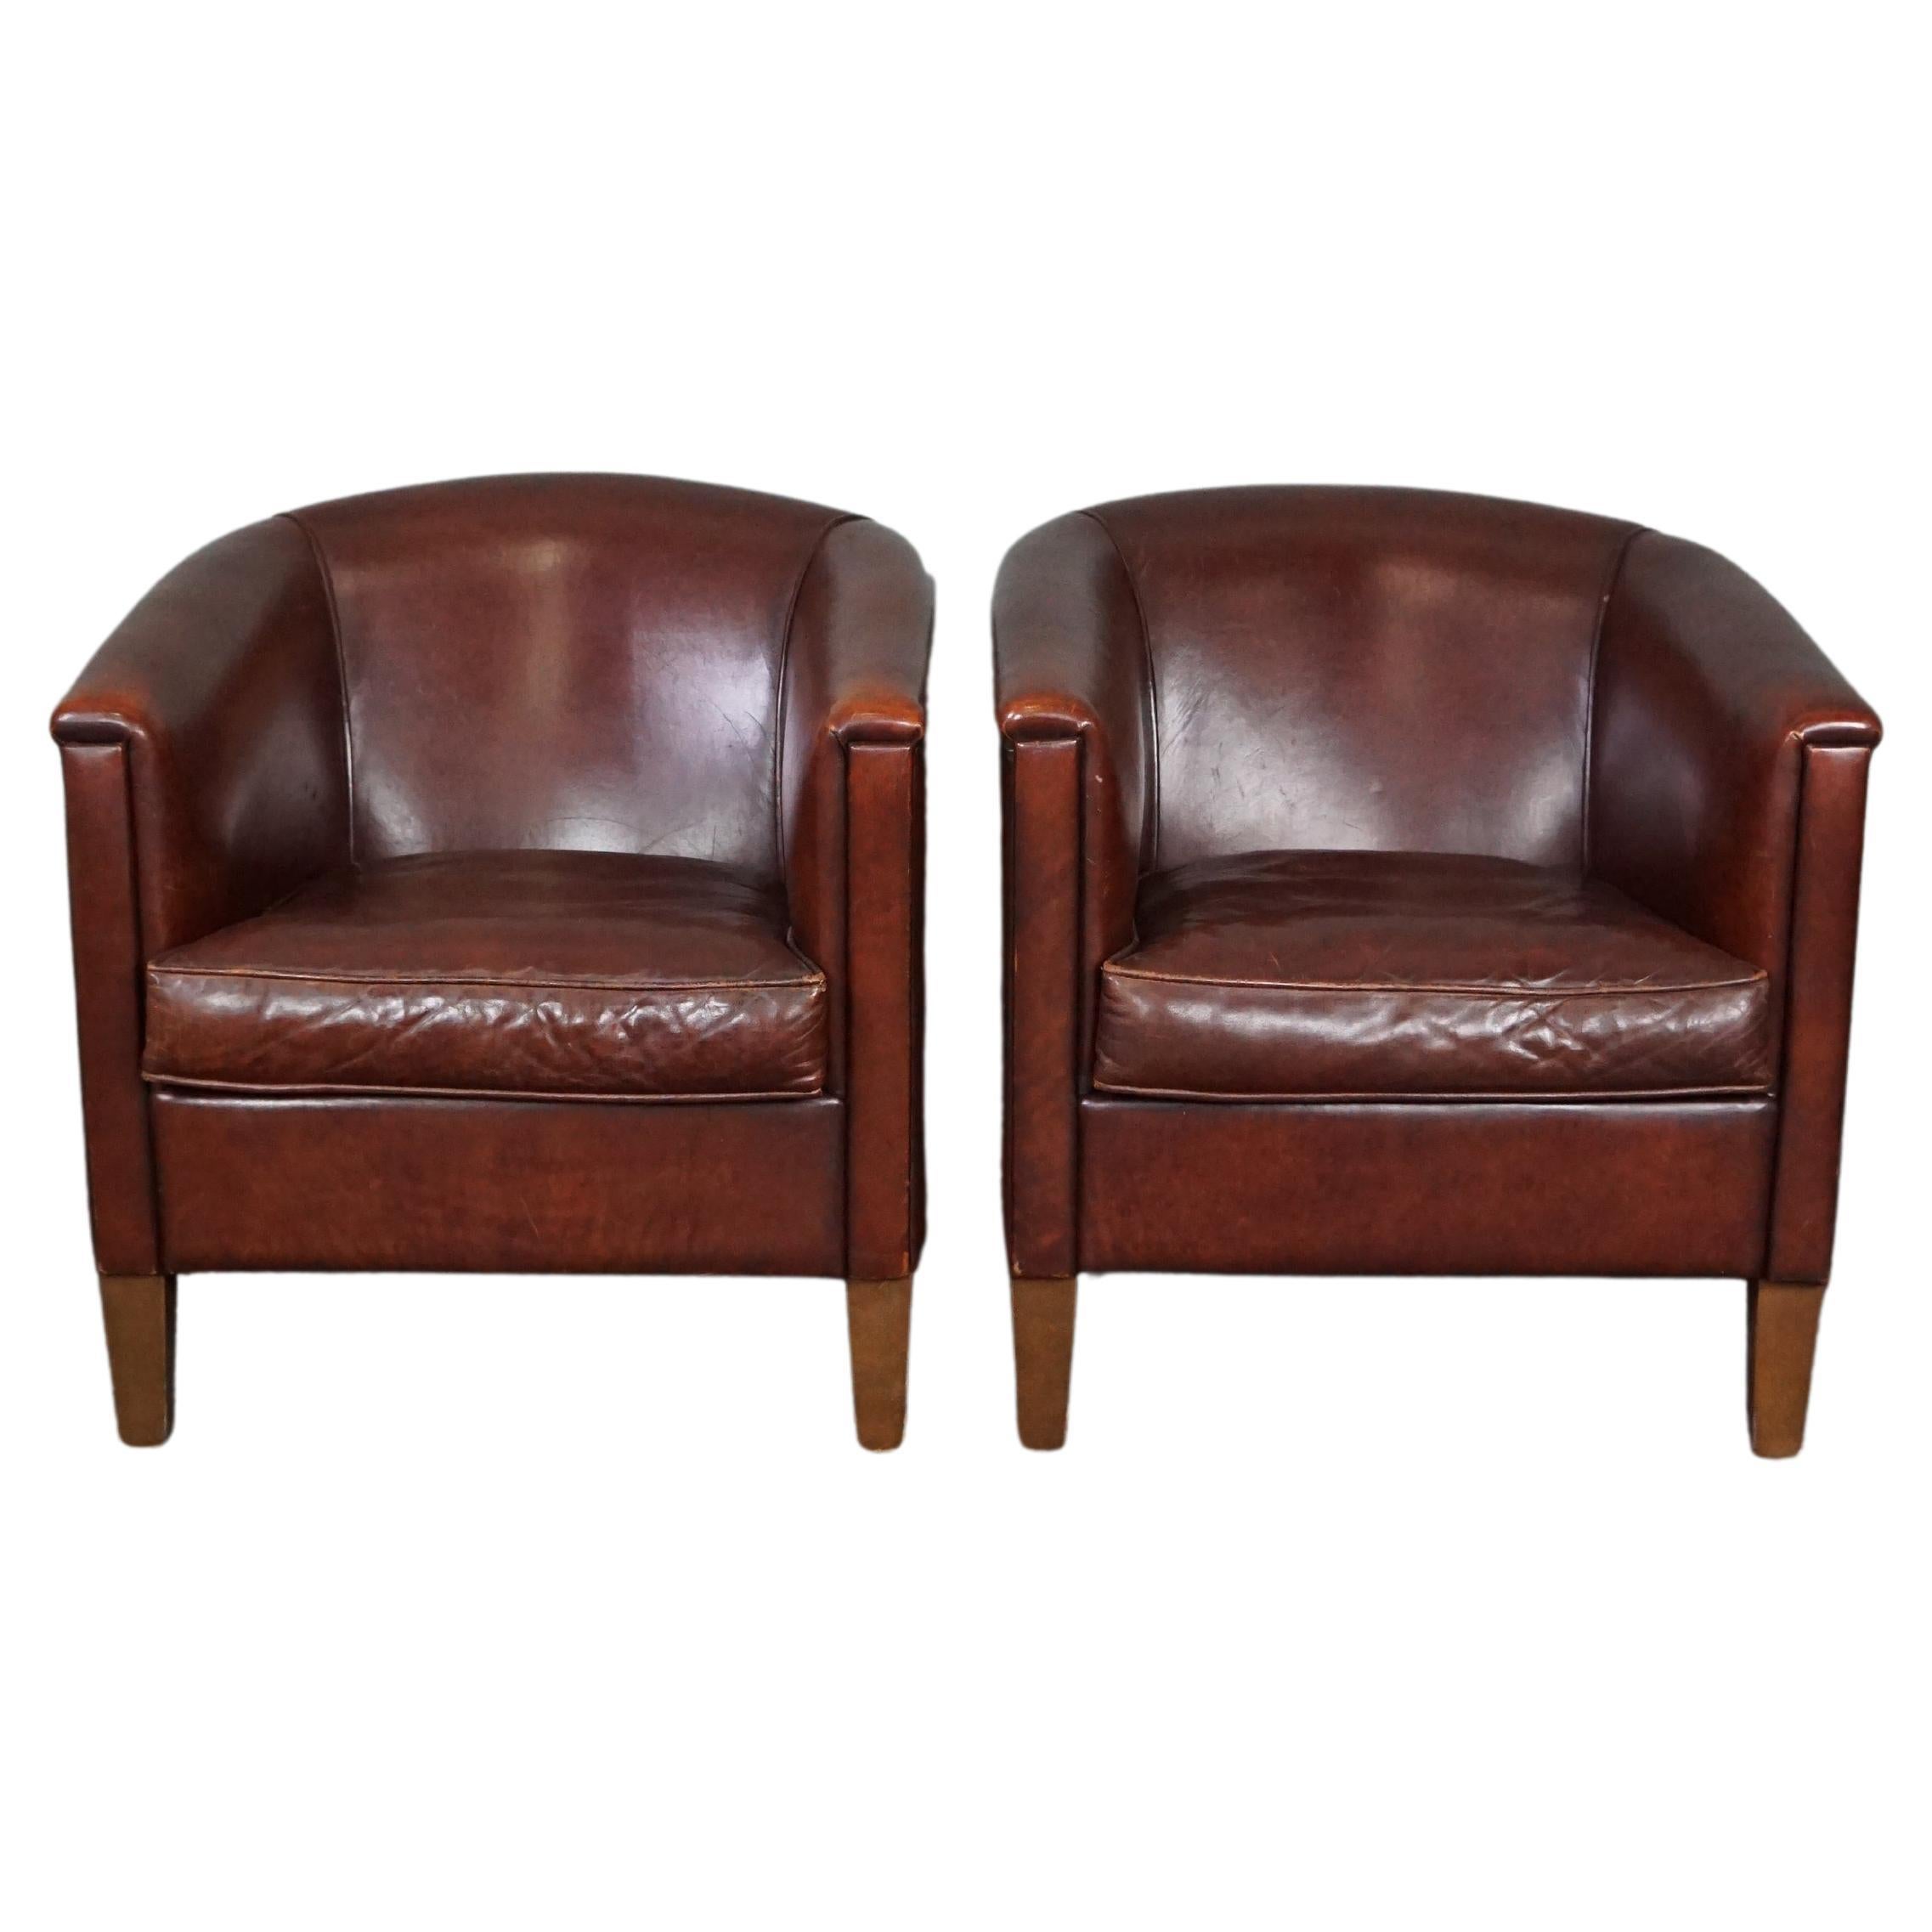 Set of 2 comfortable sheep leather armchairs